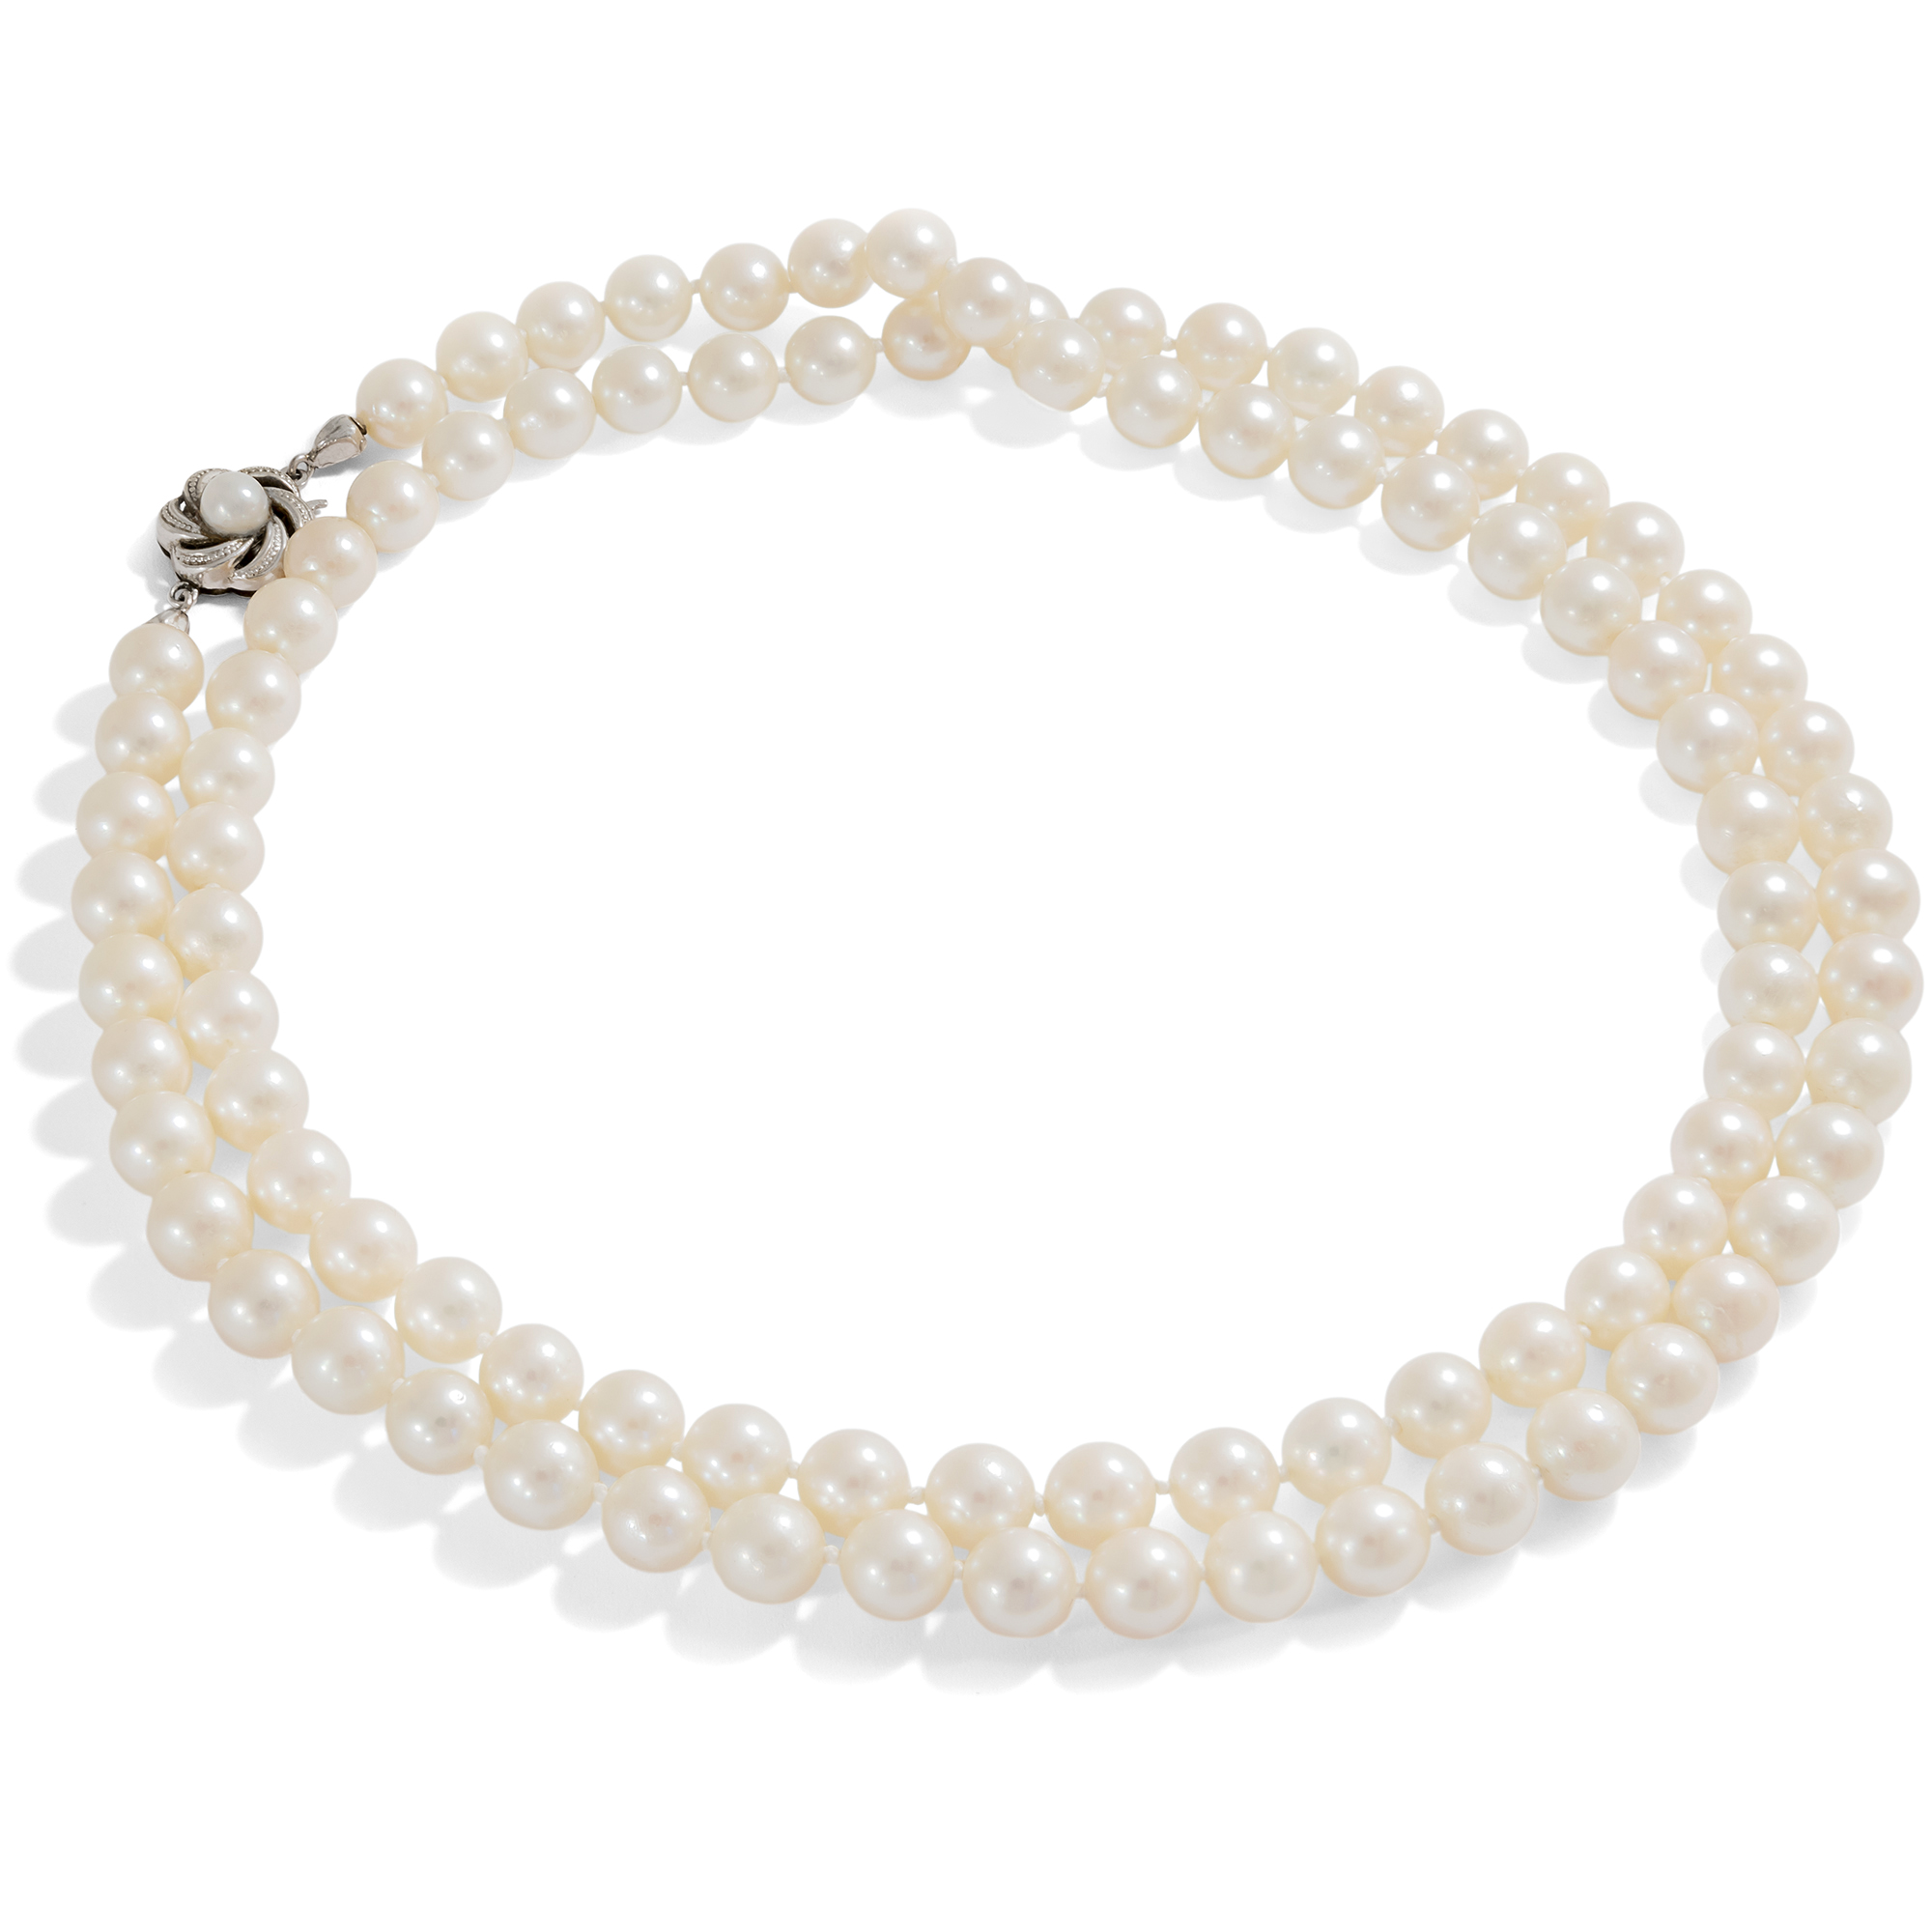 Elegant Opera Length Pearl Necklace With White Gold Clasp, Circa 1965